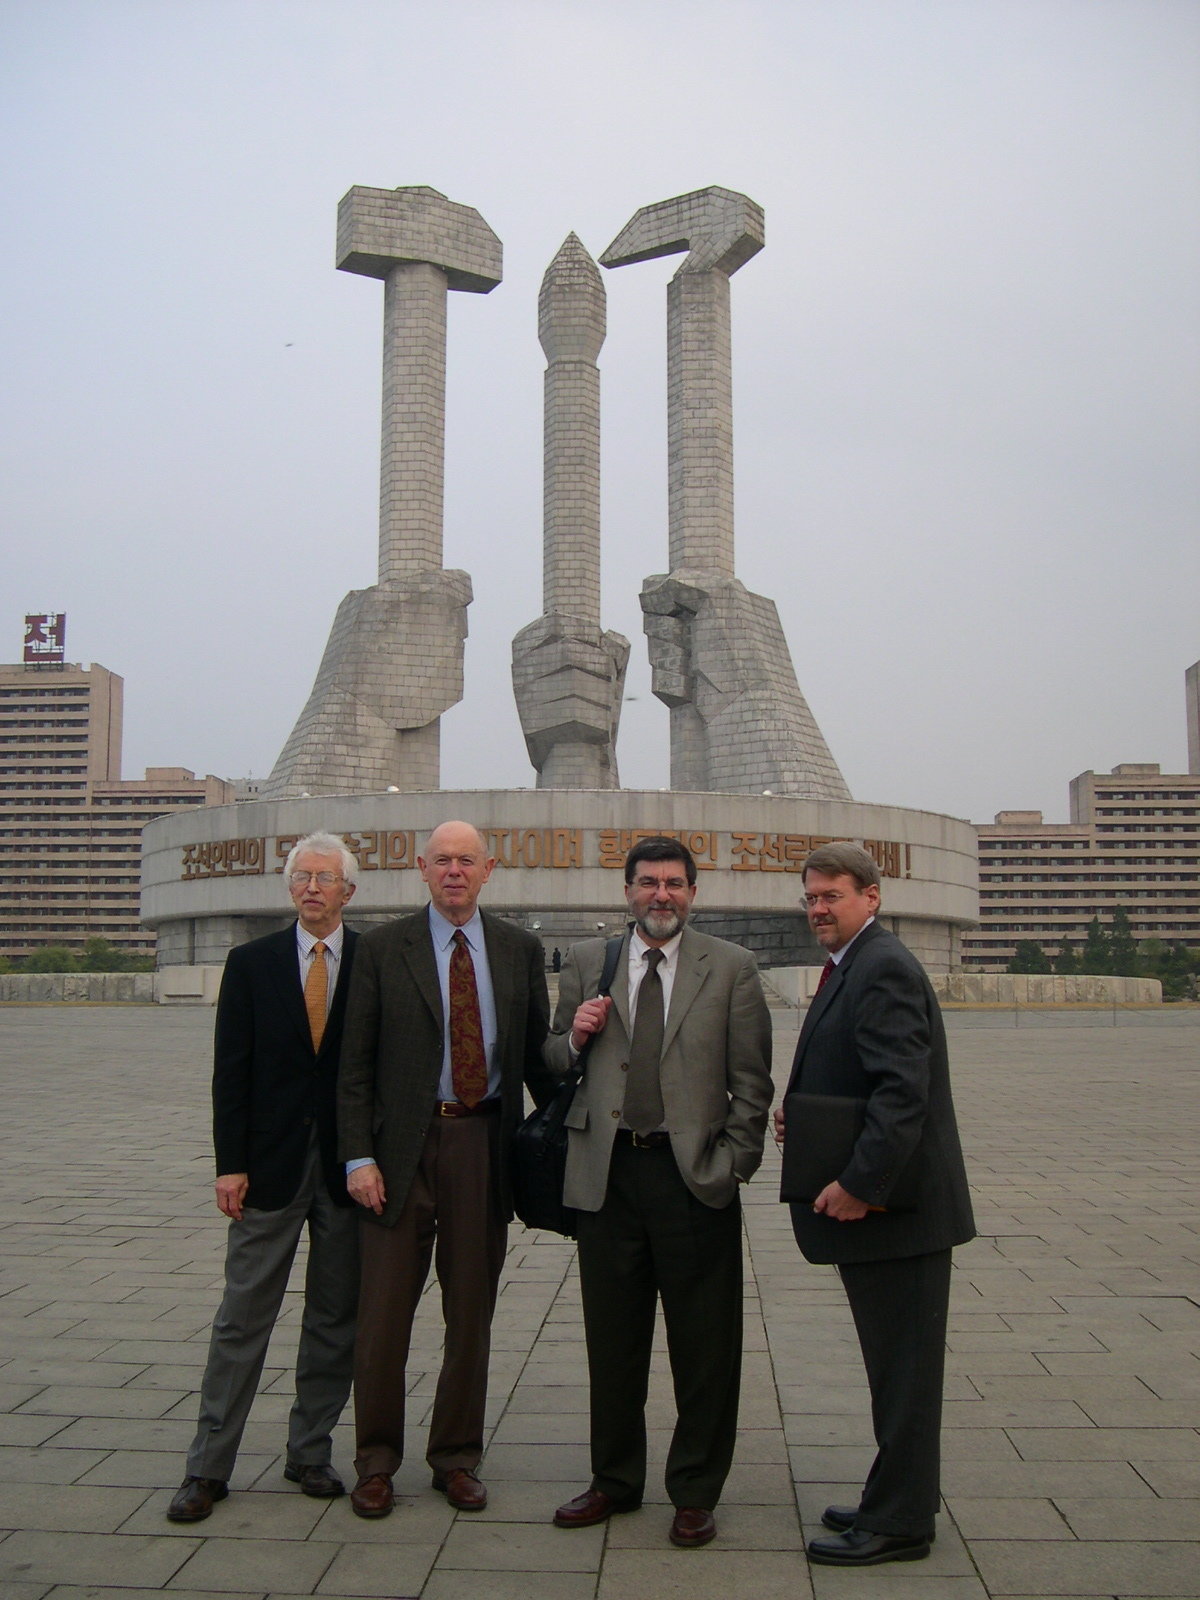 Four men in business suits posing for picture in front of a massive sculptural composition featuring stone fists clutching items symbolizing values of labor and knowledge